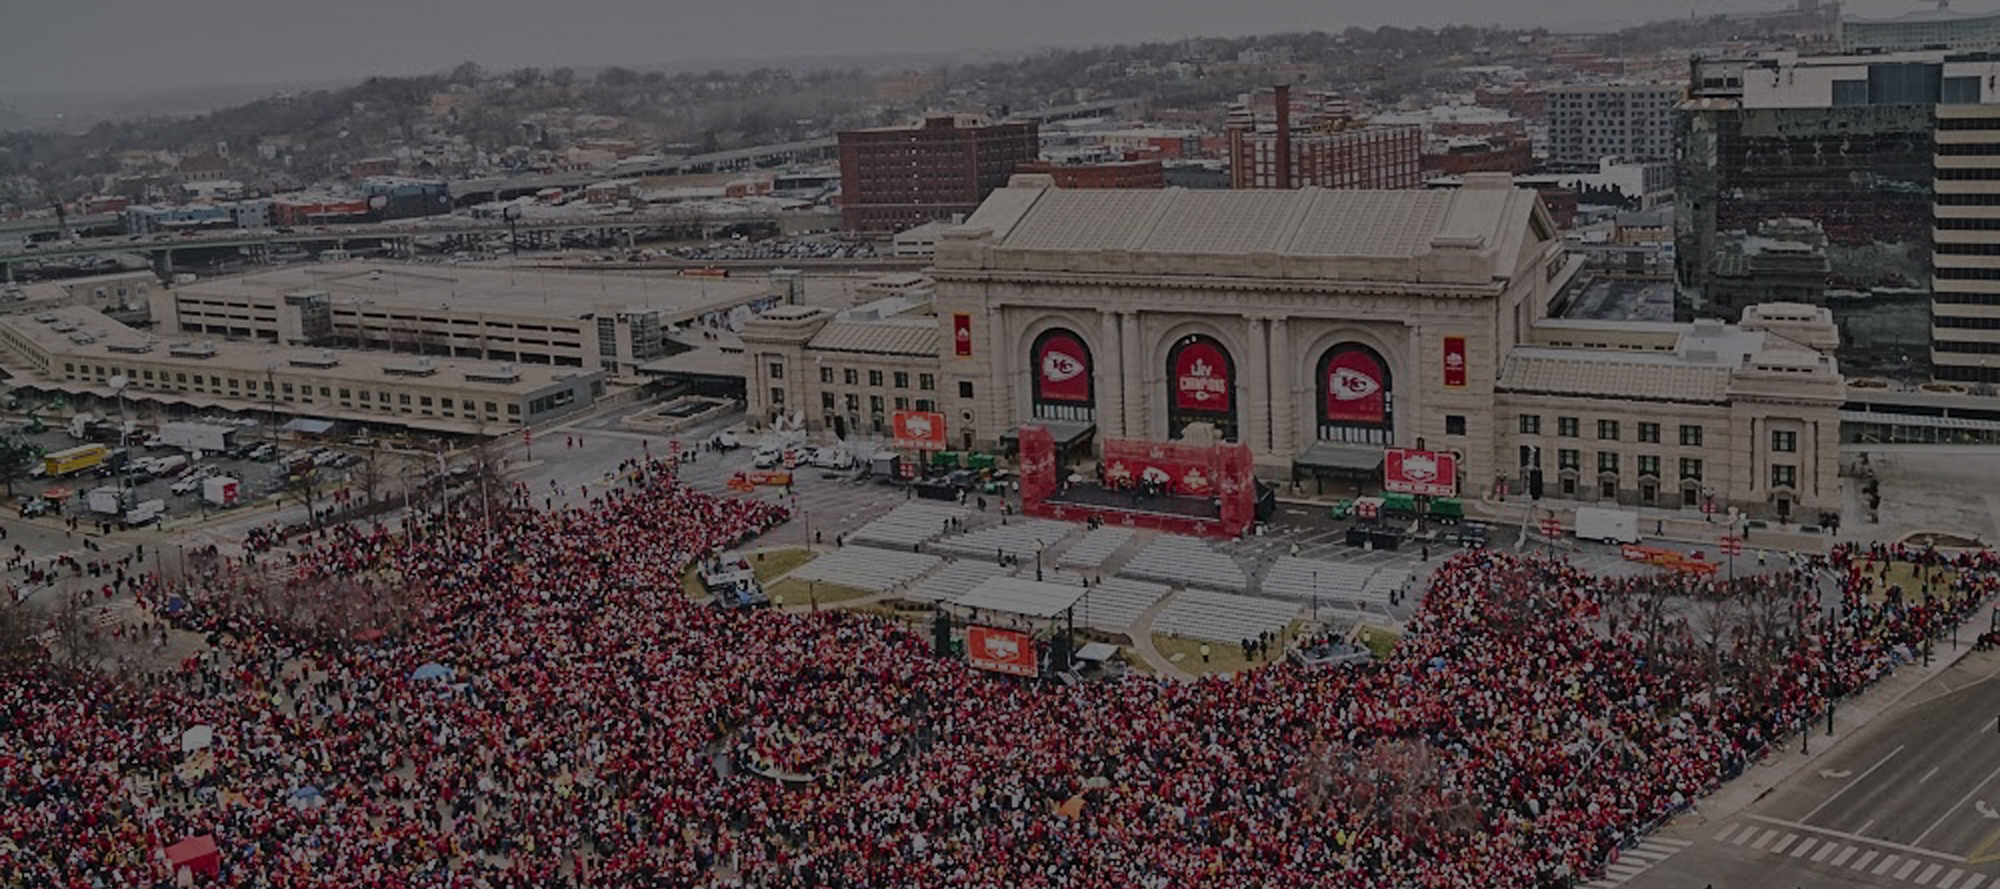 Kansas City Chiefs Super Bowl Victory Parade scheduled for